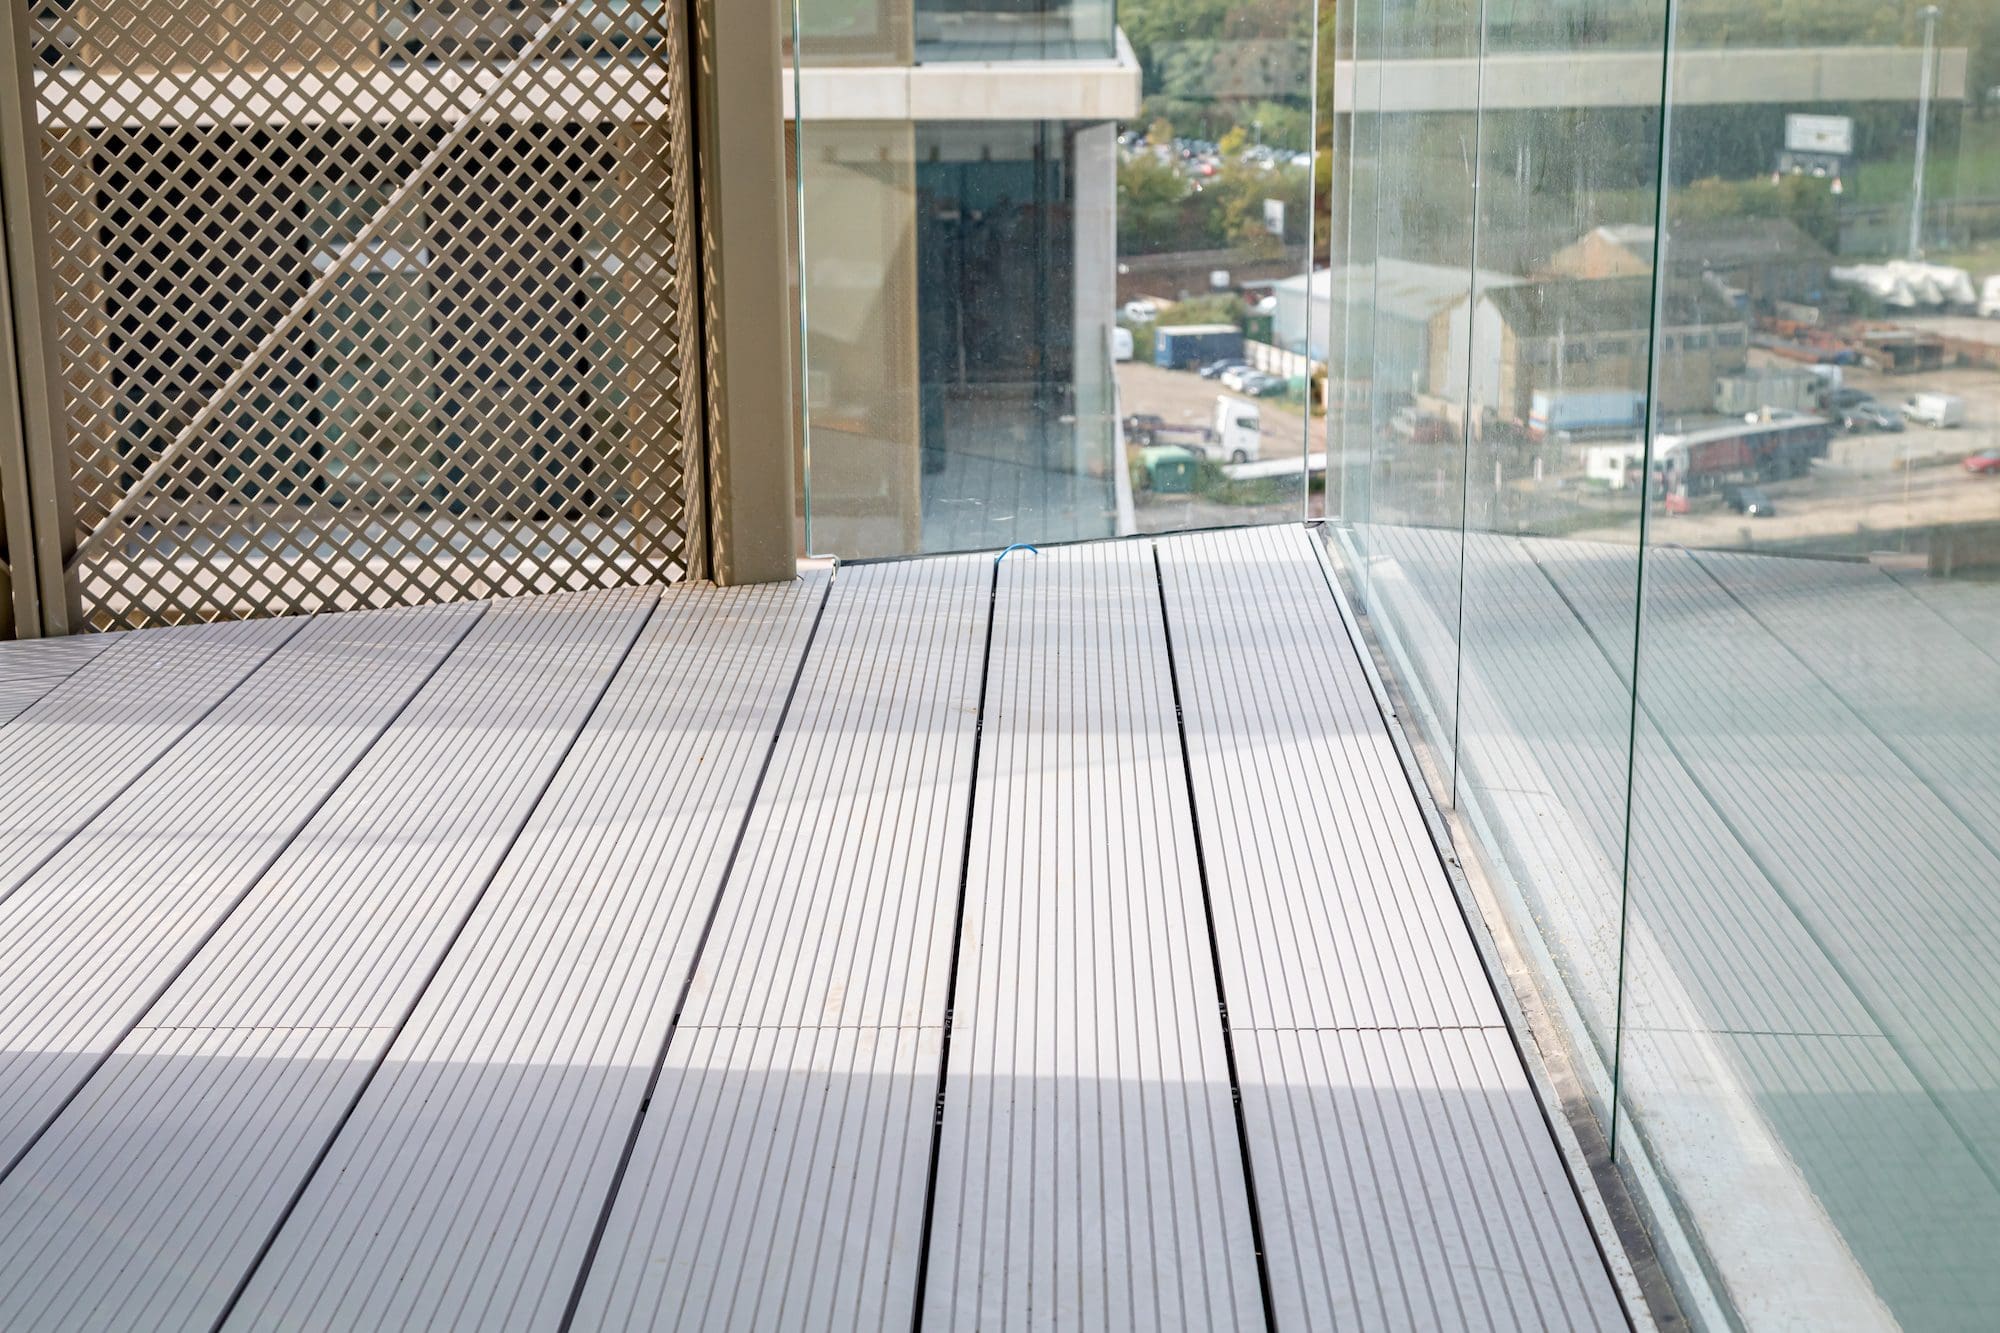 Terrace with aluminium decking and a glass balustrade